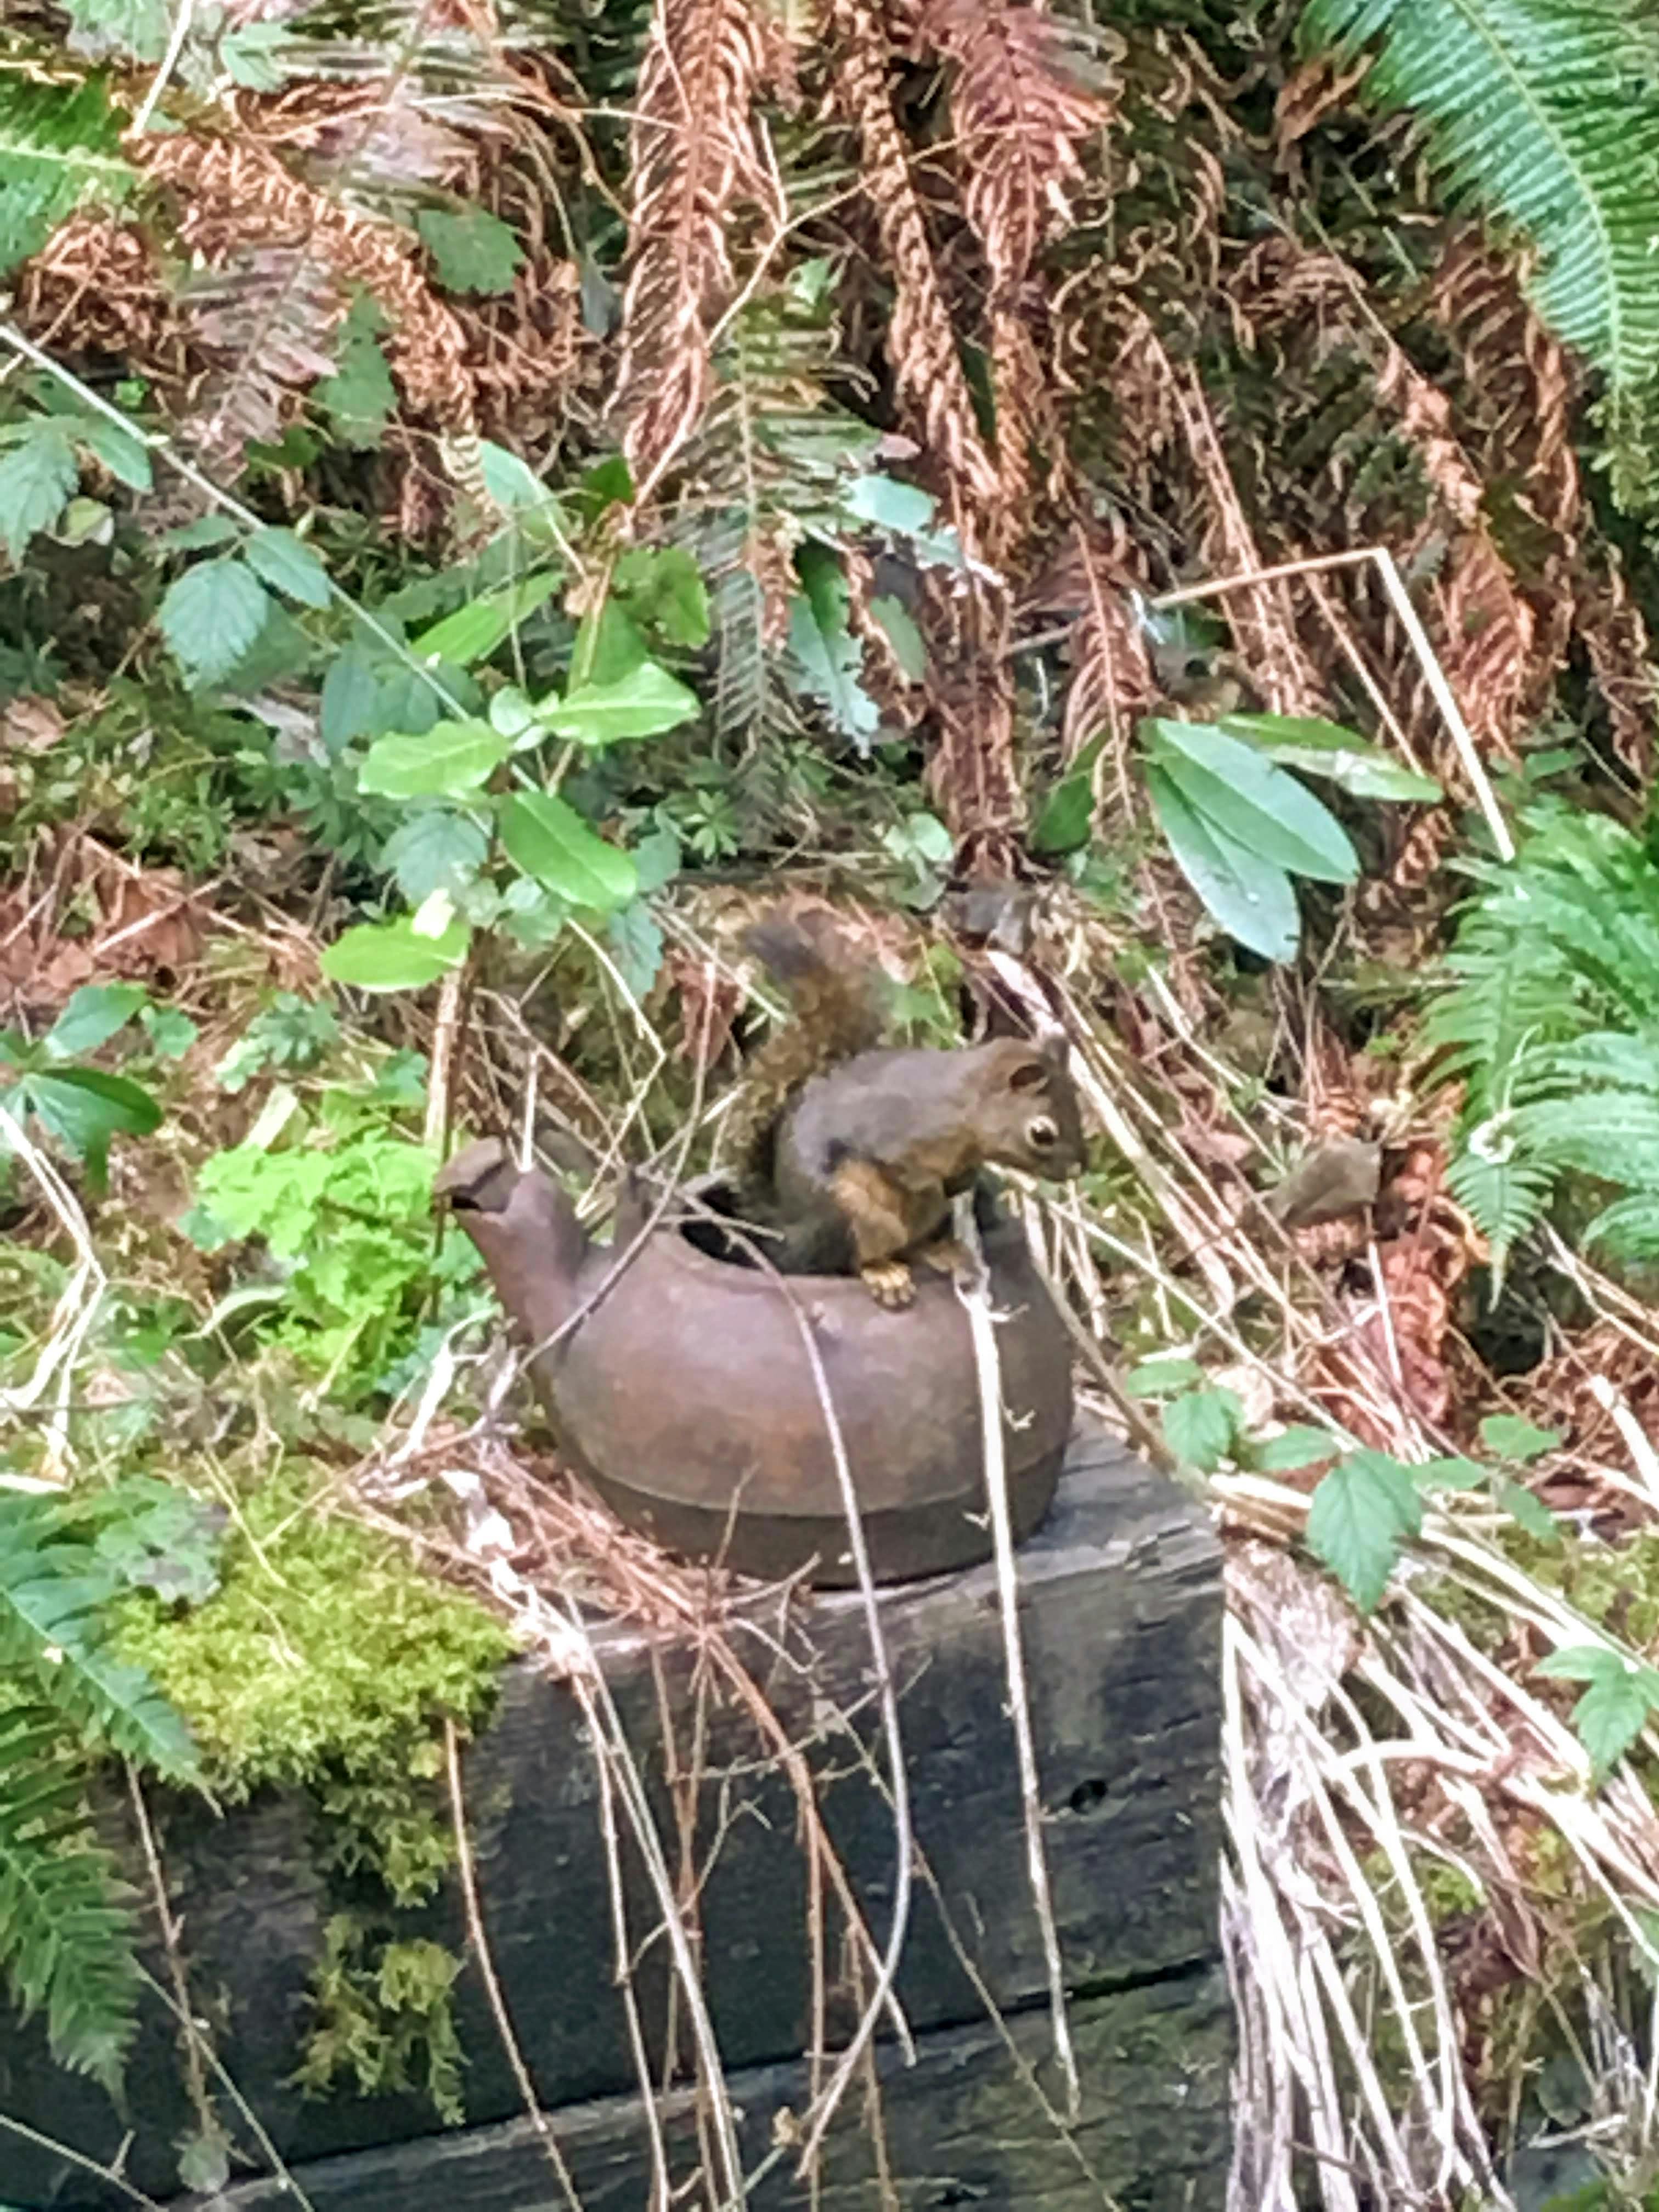 A squirrel sits on what appears to be a rusted teapot. Both are nestled in ferns, moss, and other plant debris on a wooden wall. 